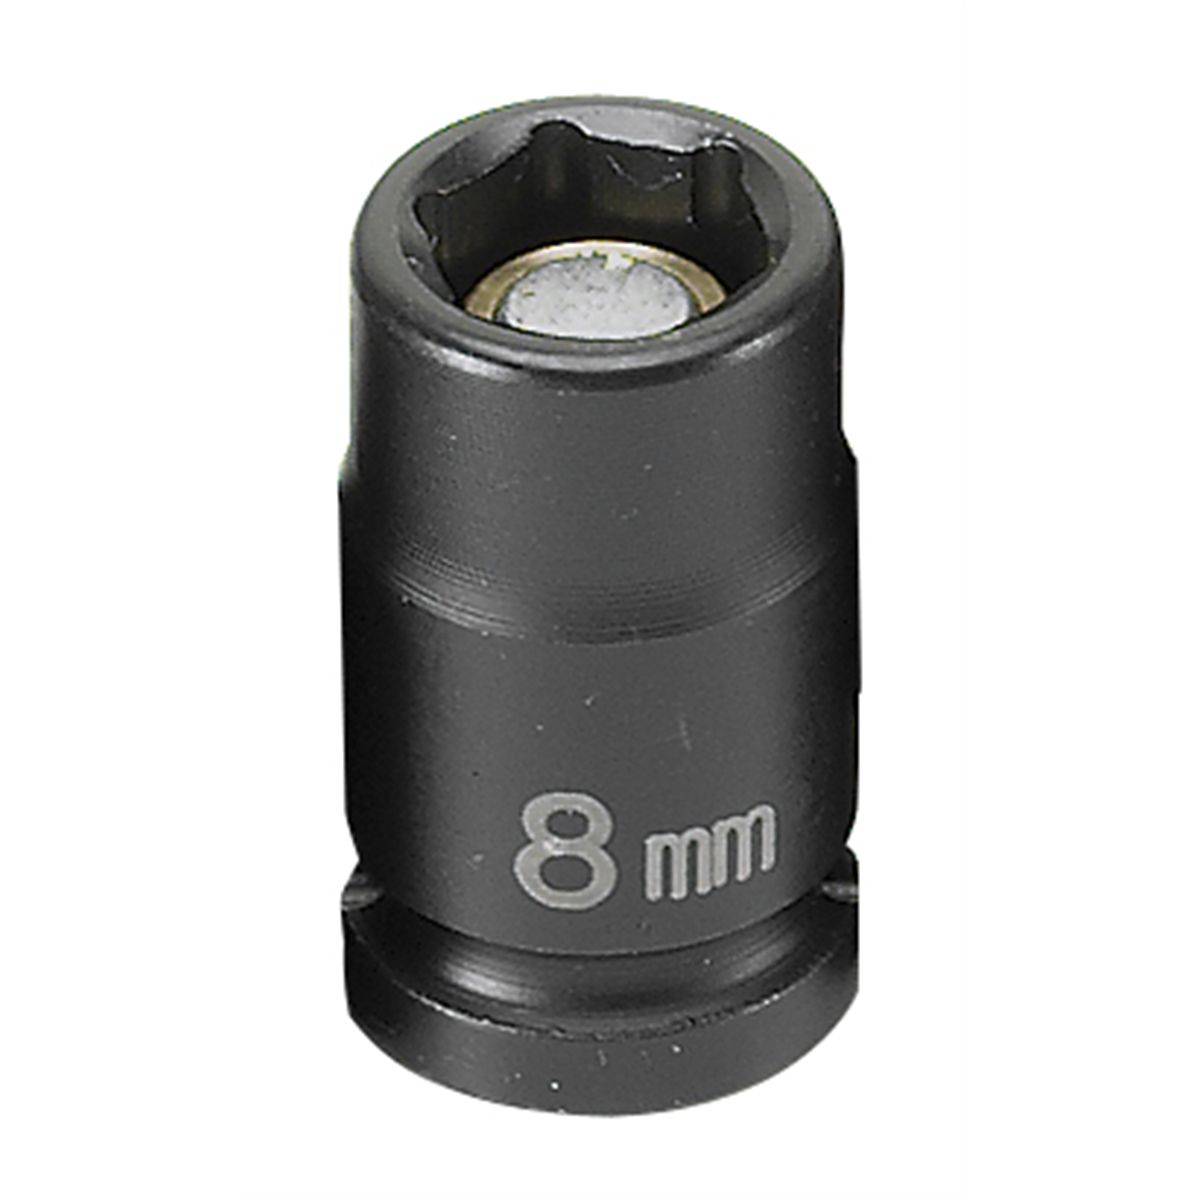 1/4" Surface Drive x 8mm Magnetic Impact Socket...